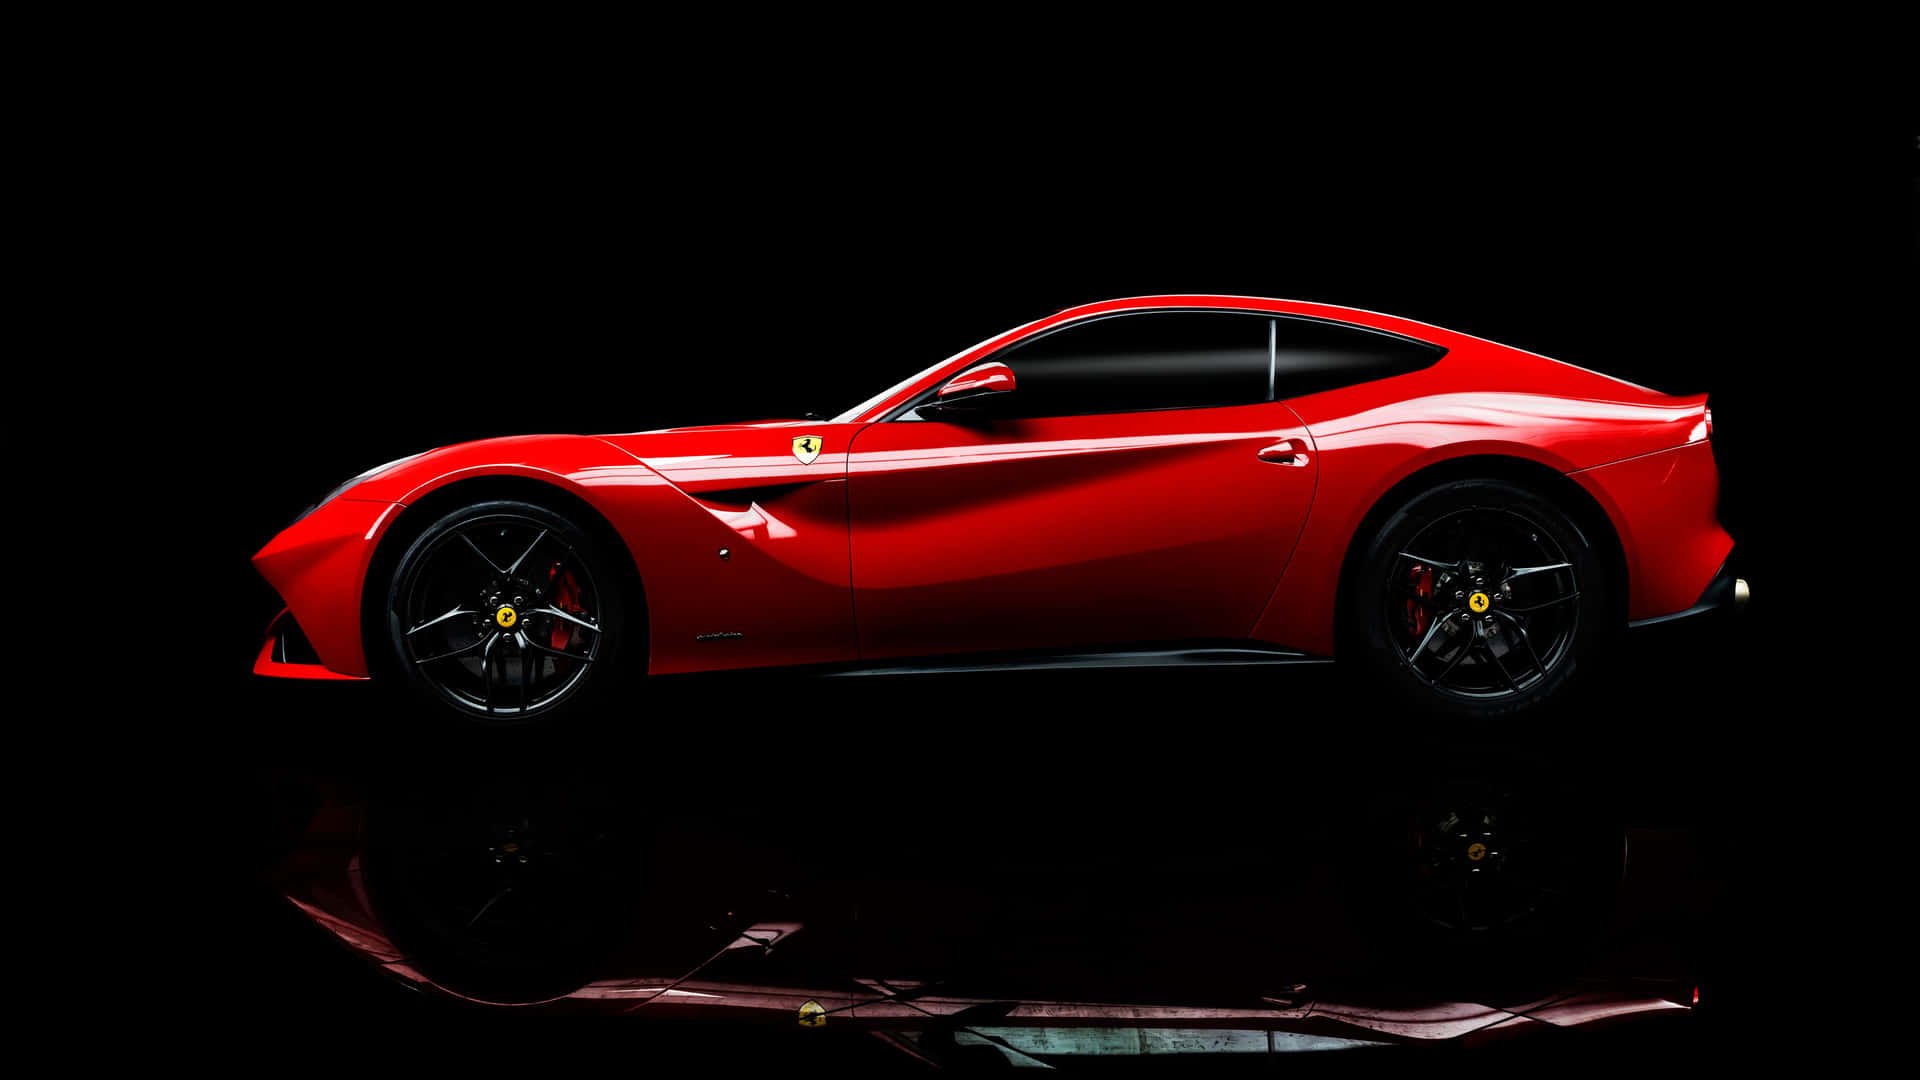 Get ready for a wild ride in this Ferrari